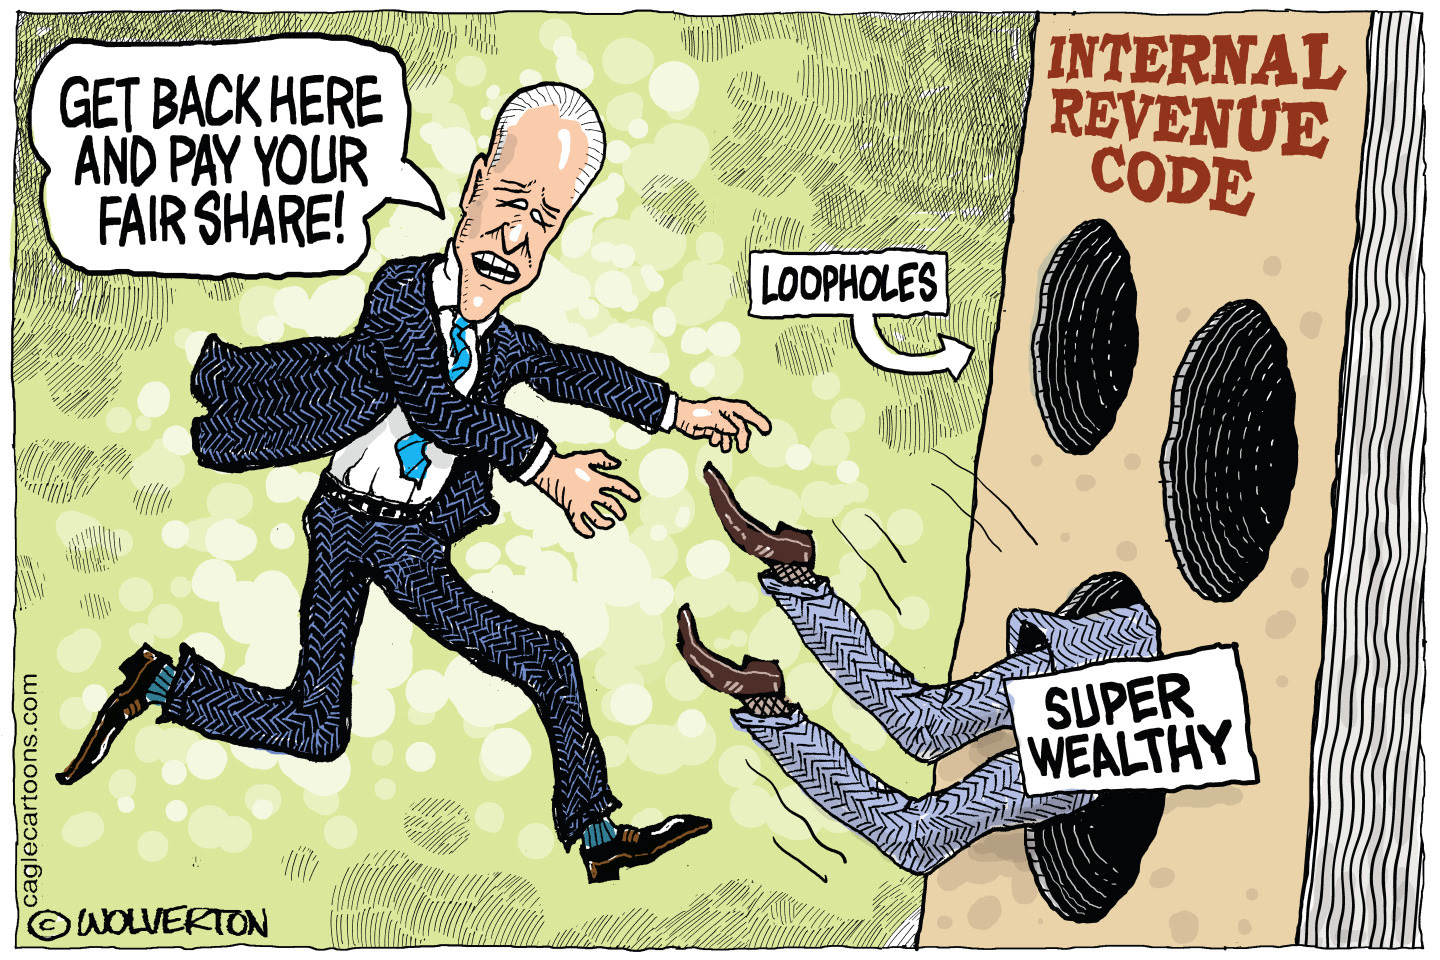 President Biden proposes to have everyone pay their fair share of taxes.